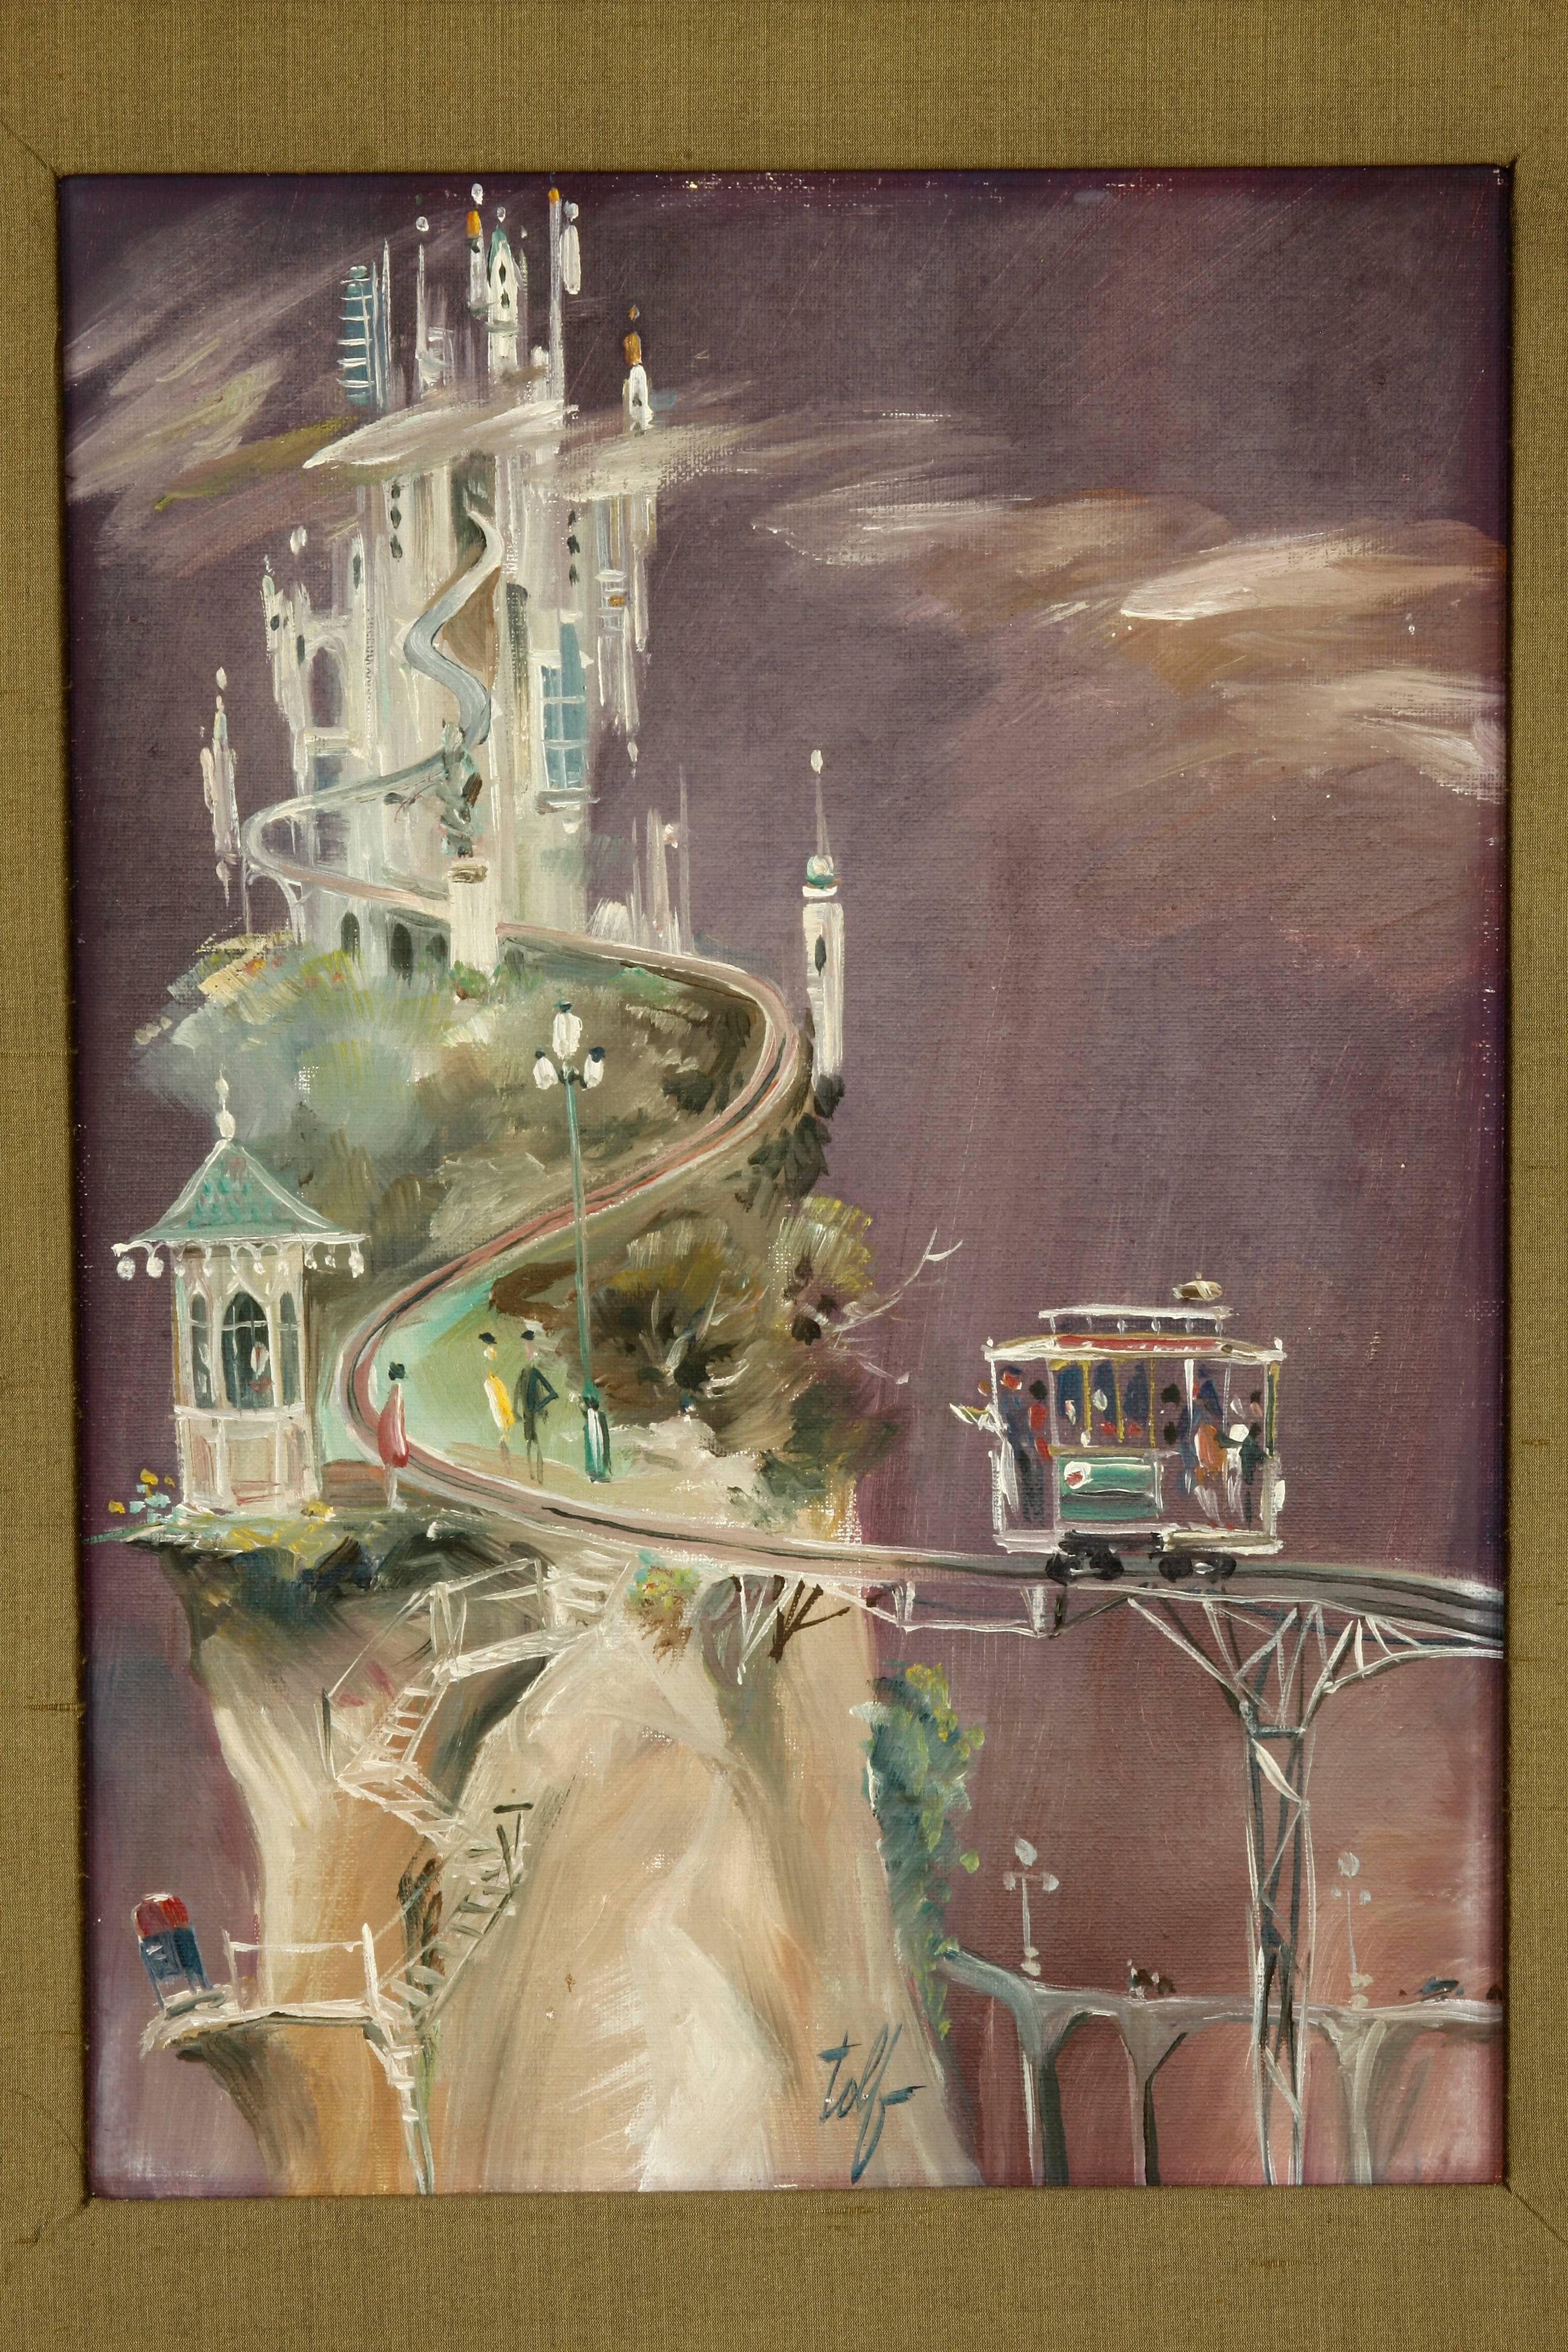 Vintage San Francisco surrealist painting attributed to Albert Tolf depicting a trolley or cable car climbing up a steep street to a city perched on a hill. Albert Tolf (1911-1996 American) was known for his "San Fantasia" artwork based on